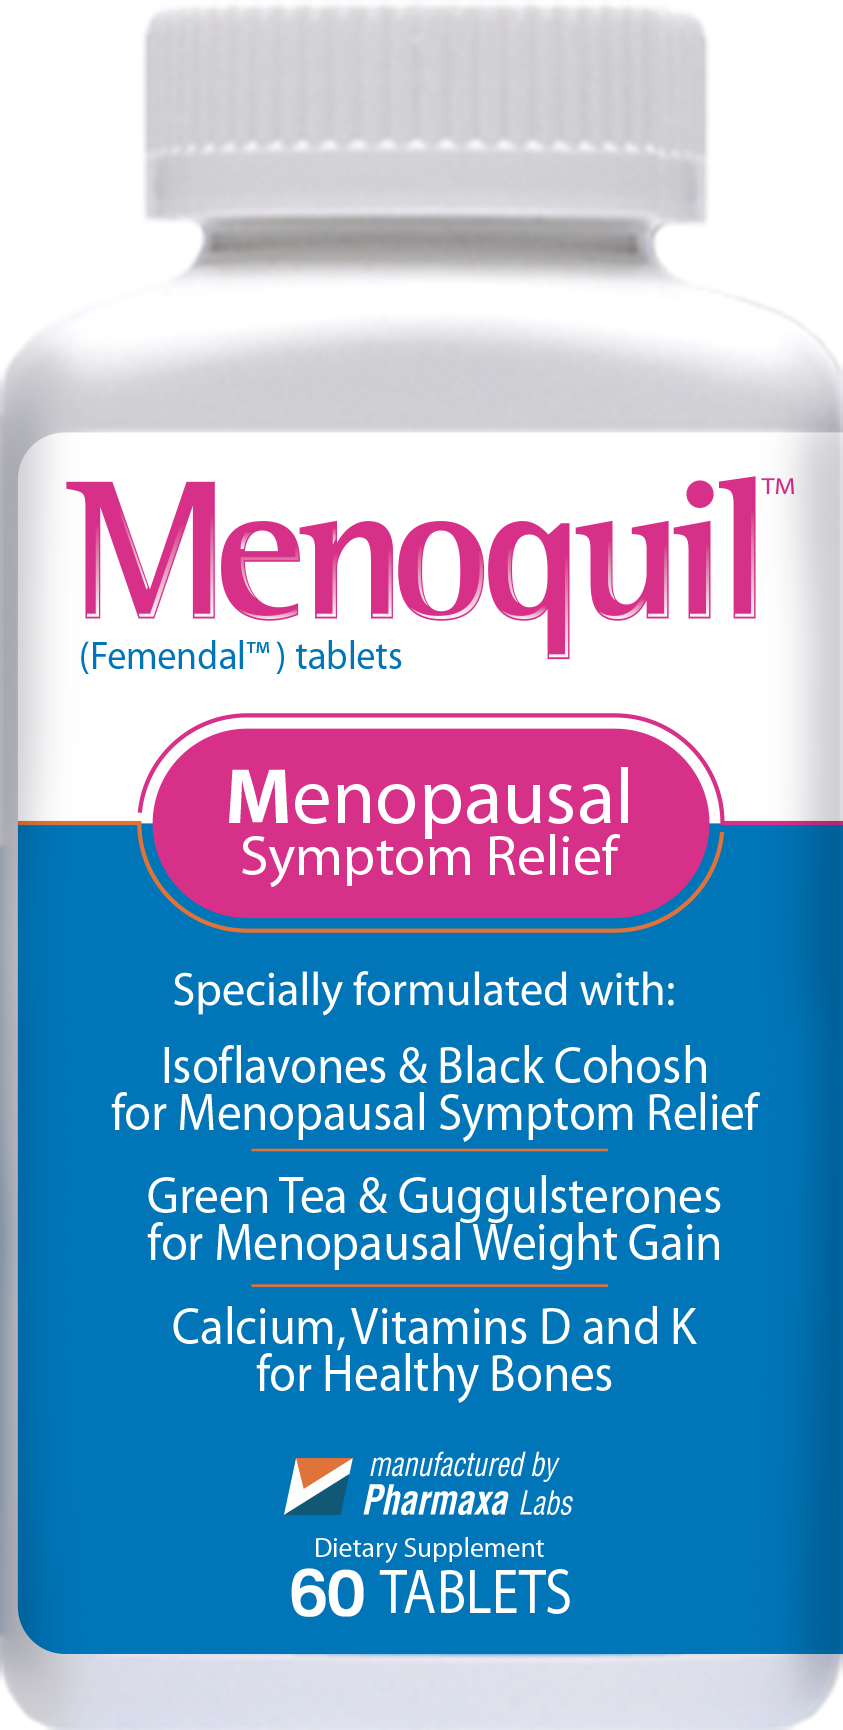 Menoquil introductory  pack - Menoquil